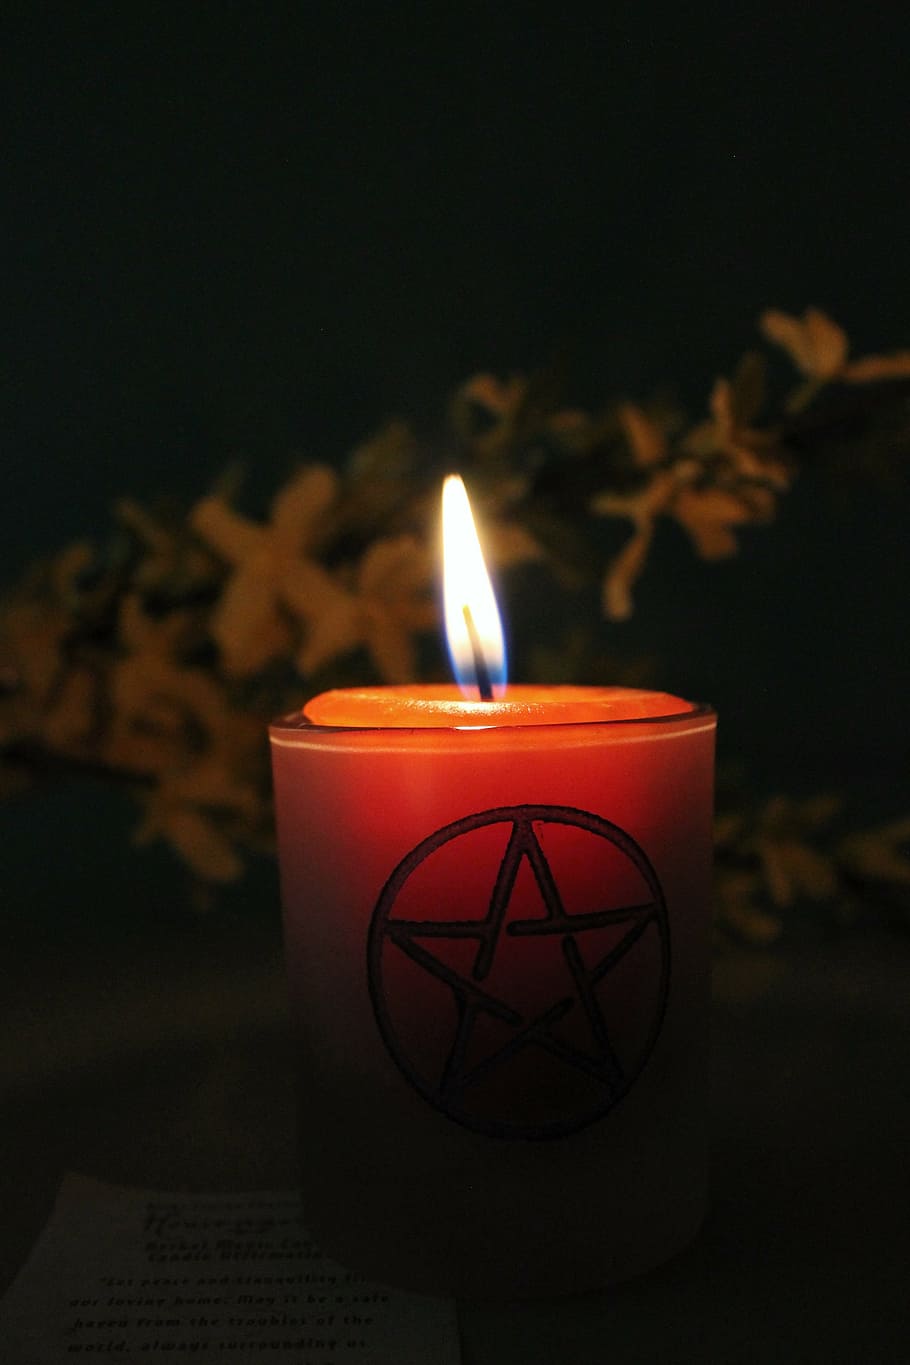 lighted pillar candle, candle magic, candle magick, wicca, pagan, magic, flame, occult, ancient, esoteric